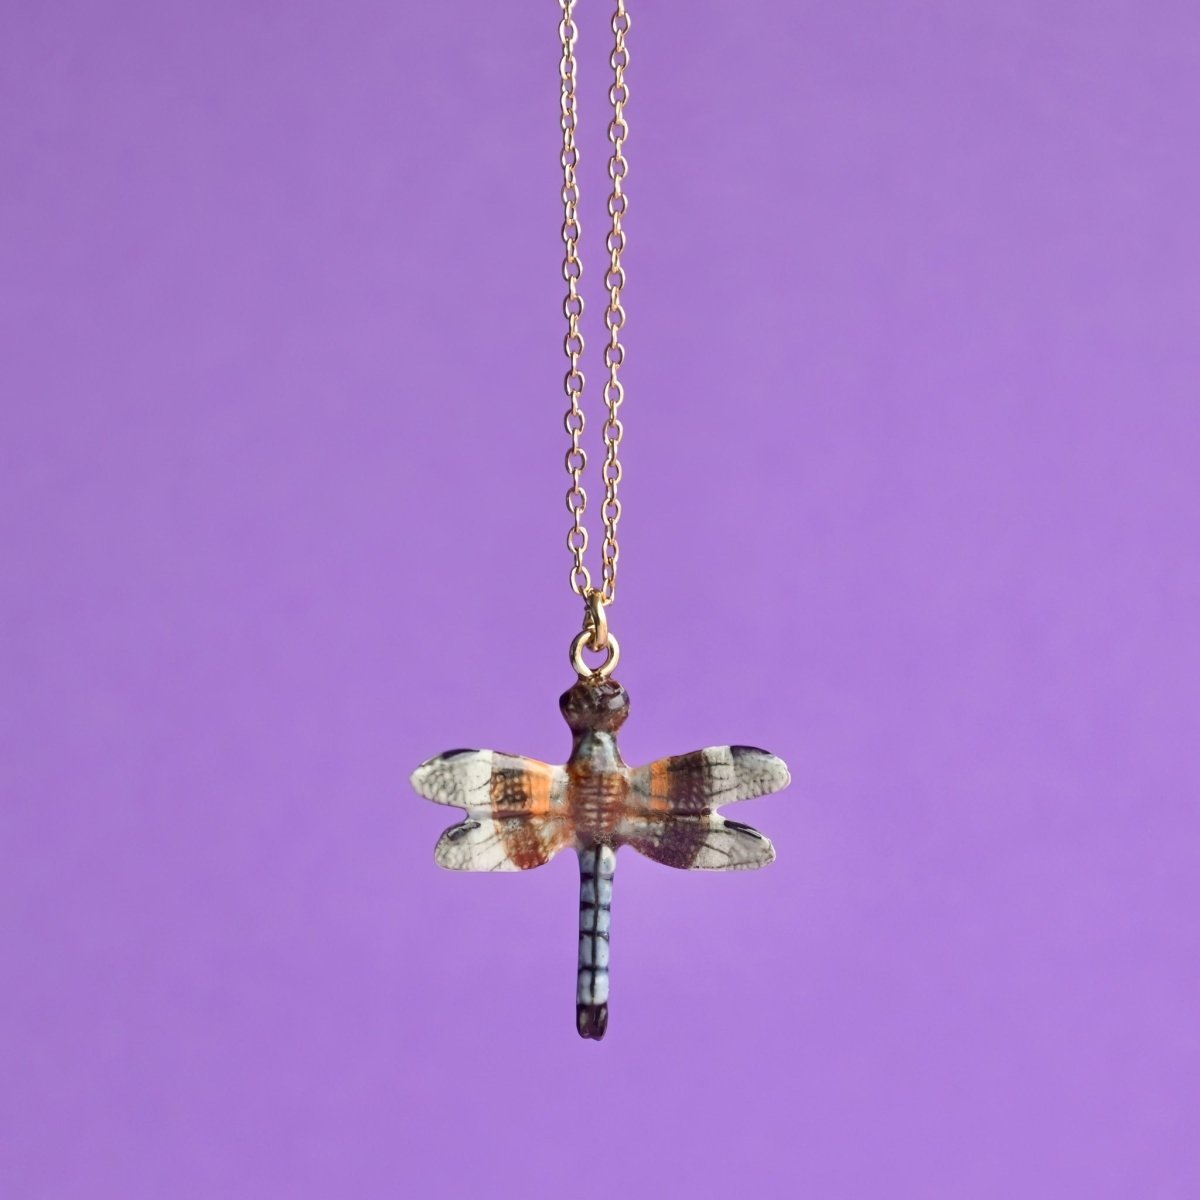 Blue-tailed Dragon Fly Necklace - Camp Hollow